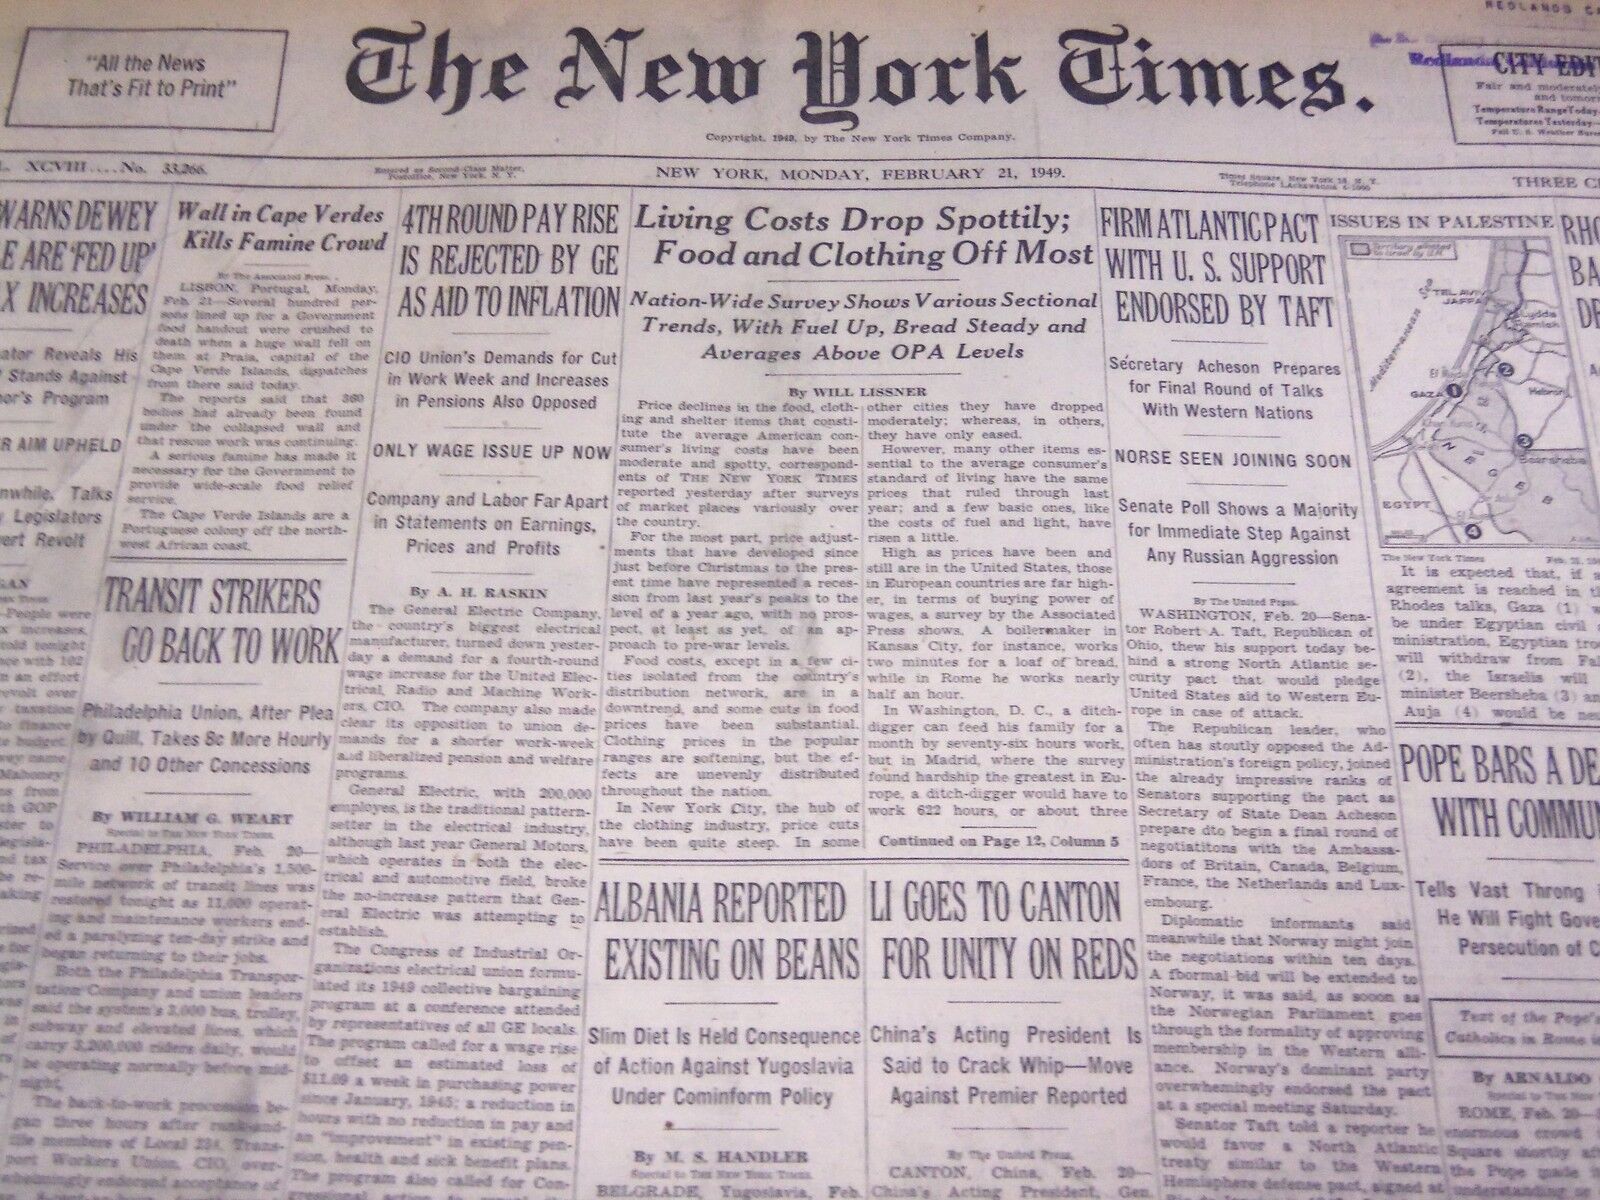 1949 FEB 21 NEW YORK TIMES - ISRAELIS TO BE EXCHANGED FOR PALESTINE - NT 2653